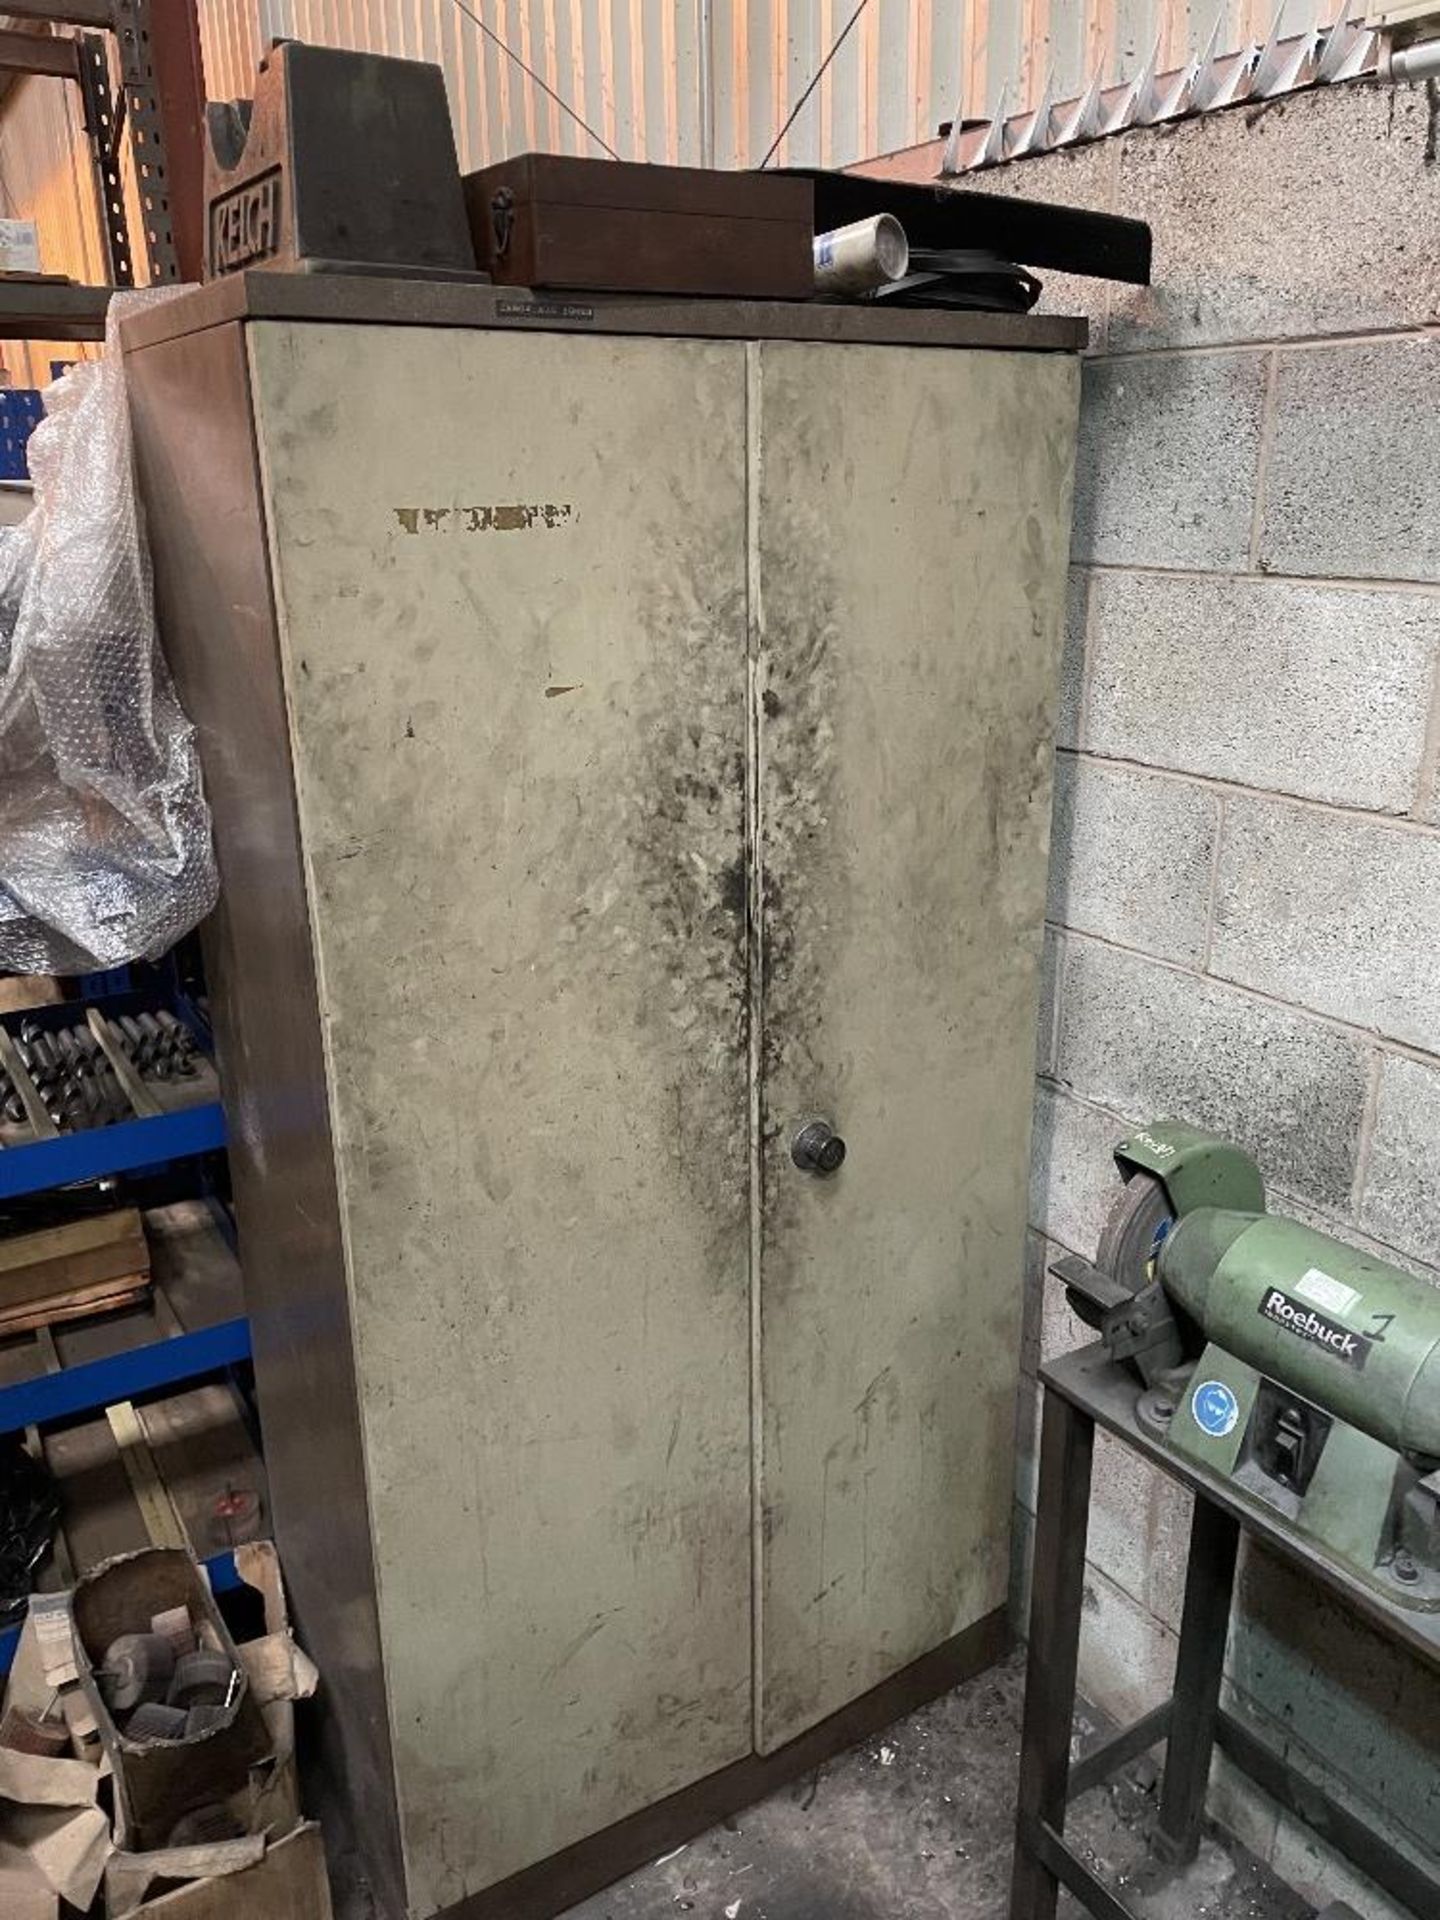 Metal Cabinet w/ Contents - As Pictured